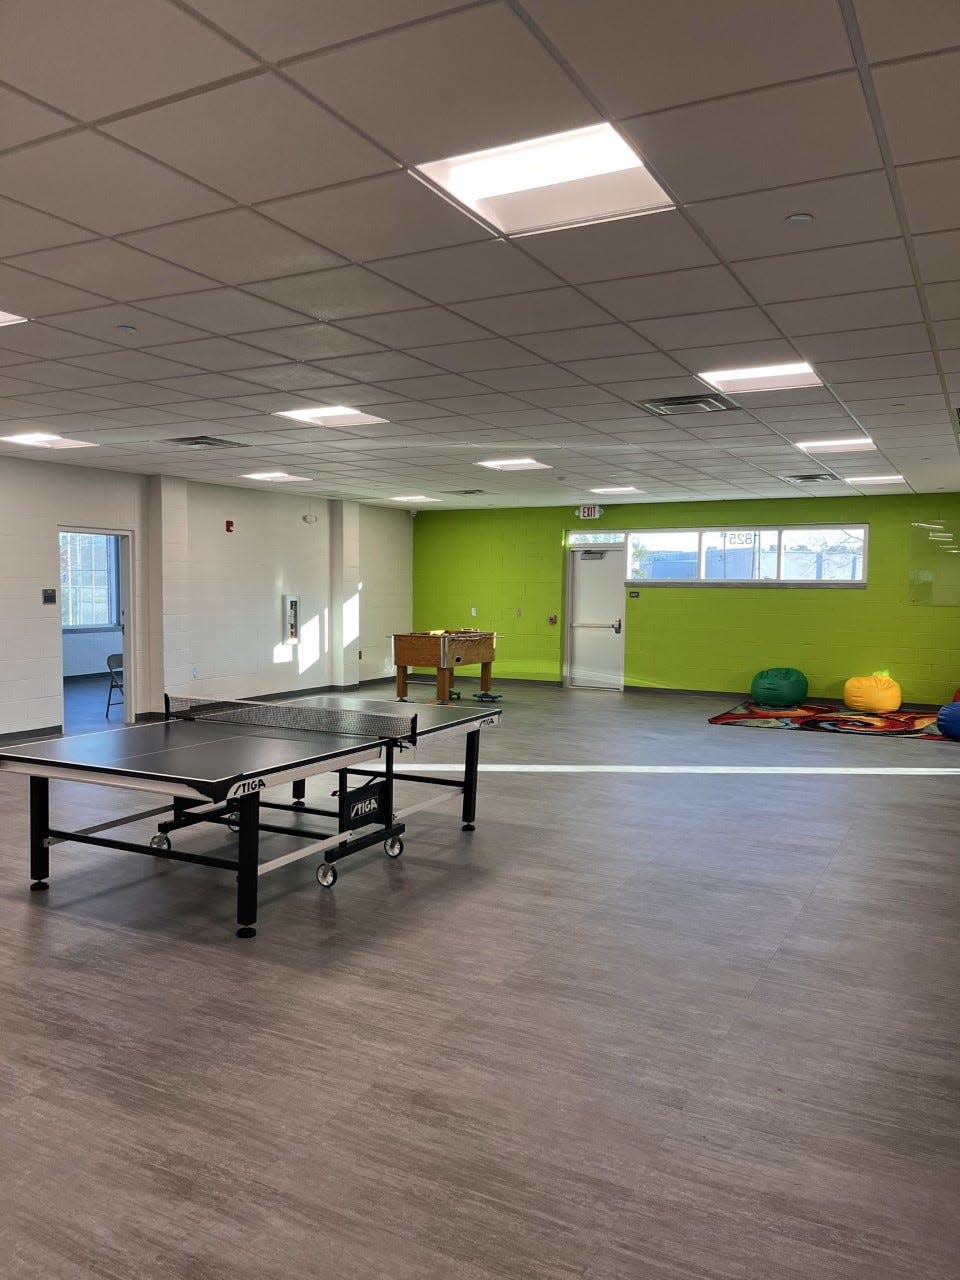 A recreation room inside Jack Amyette's new and improved facility.